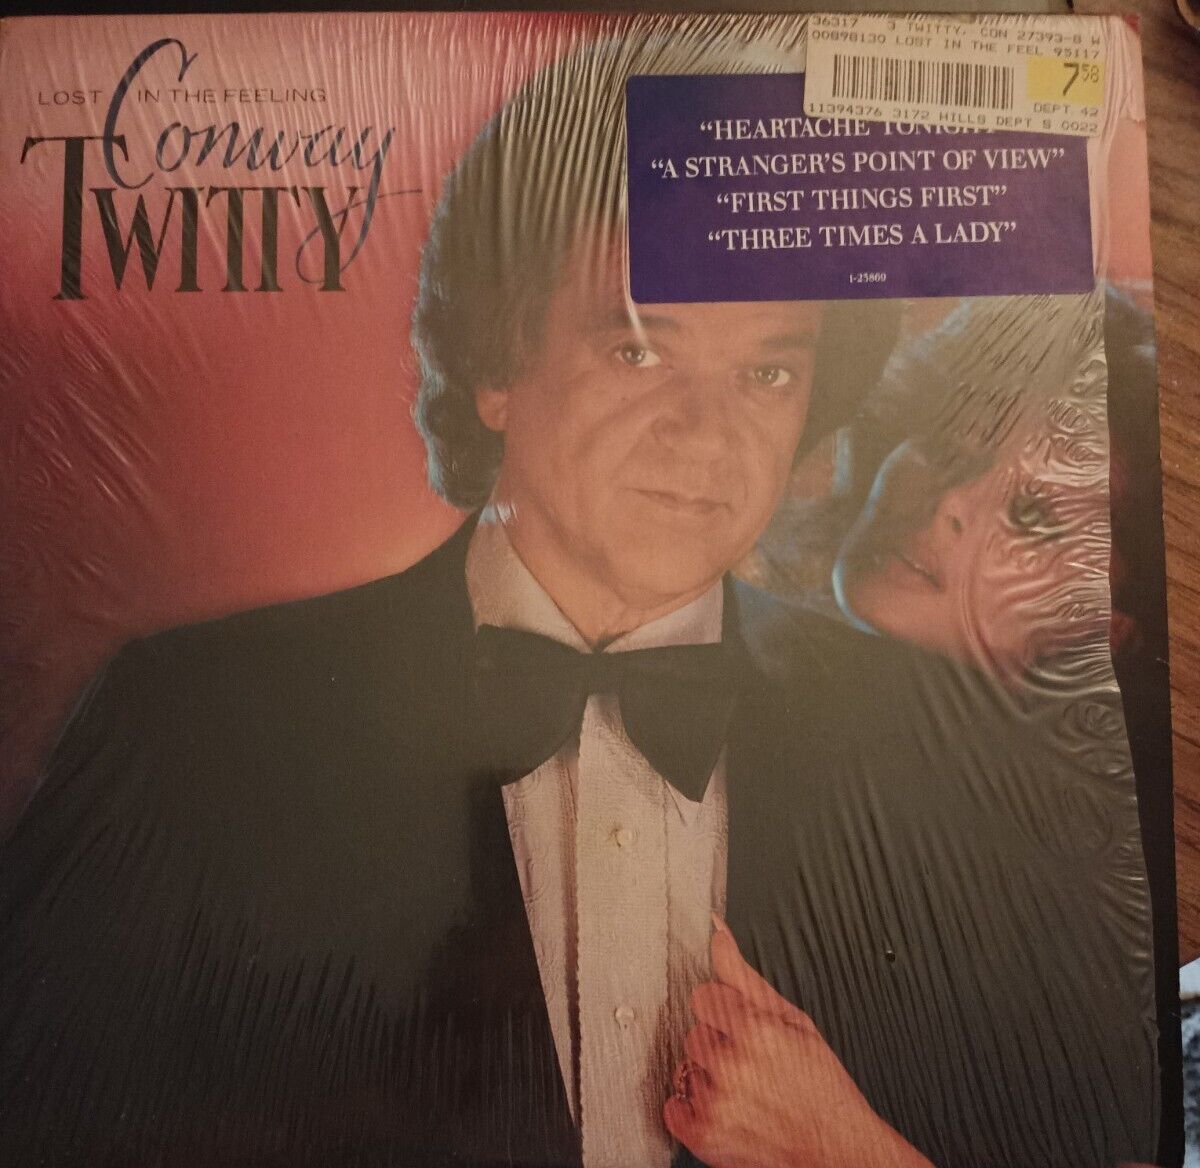 Conway Twitty Record Album 33RPM - Lost in The Feeling